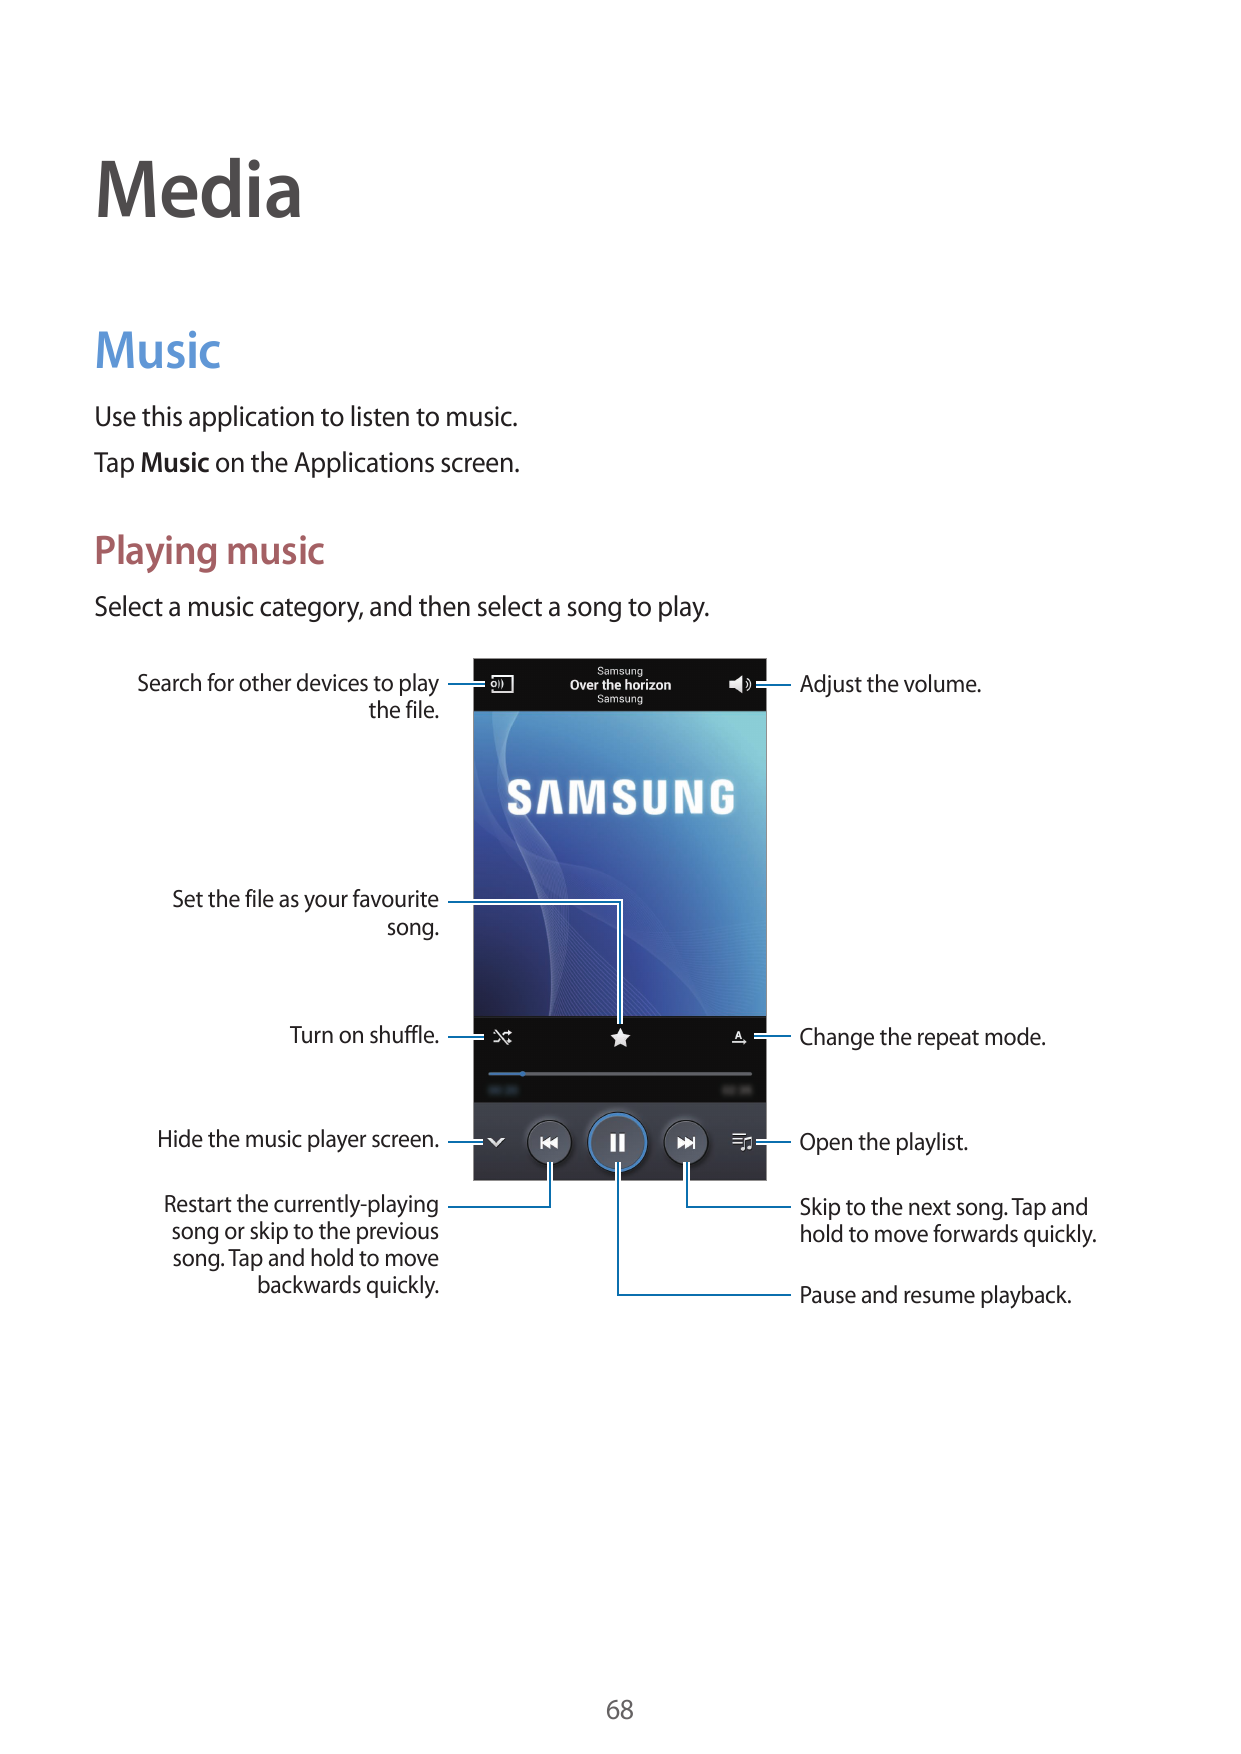 MediaMusicUse this application to listen to music.Tap Music on the Applications screen.Playing musicSelect a music category, and